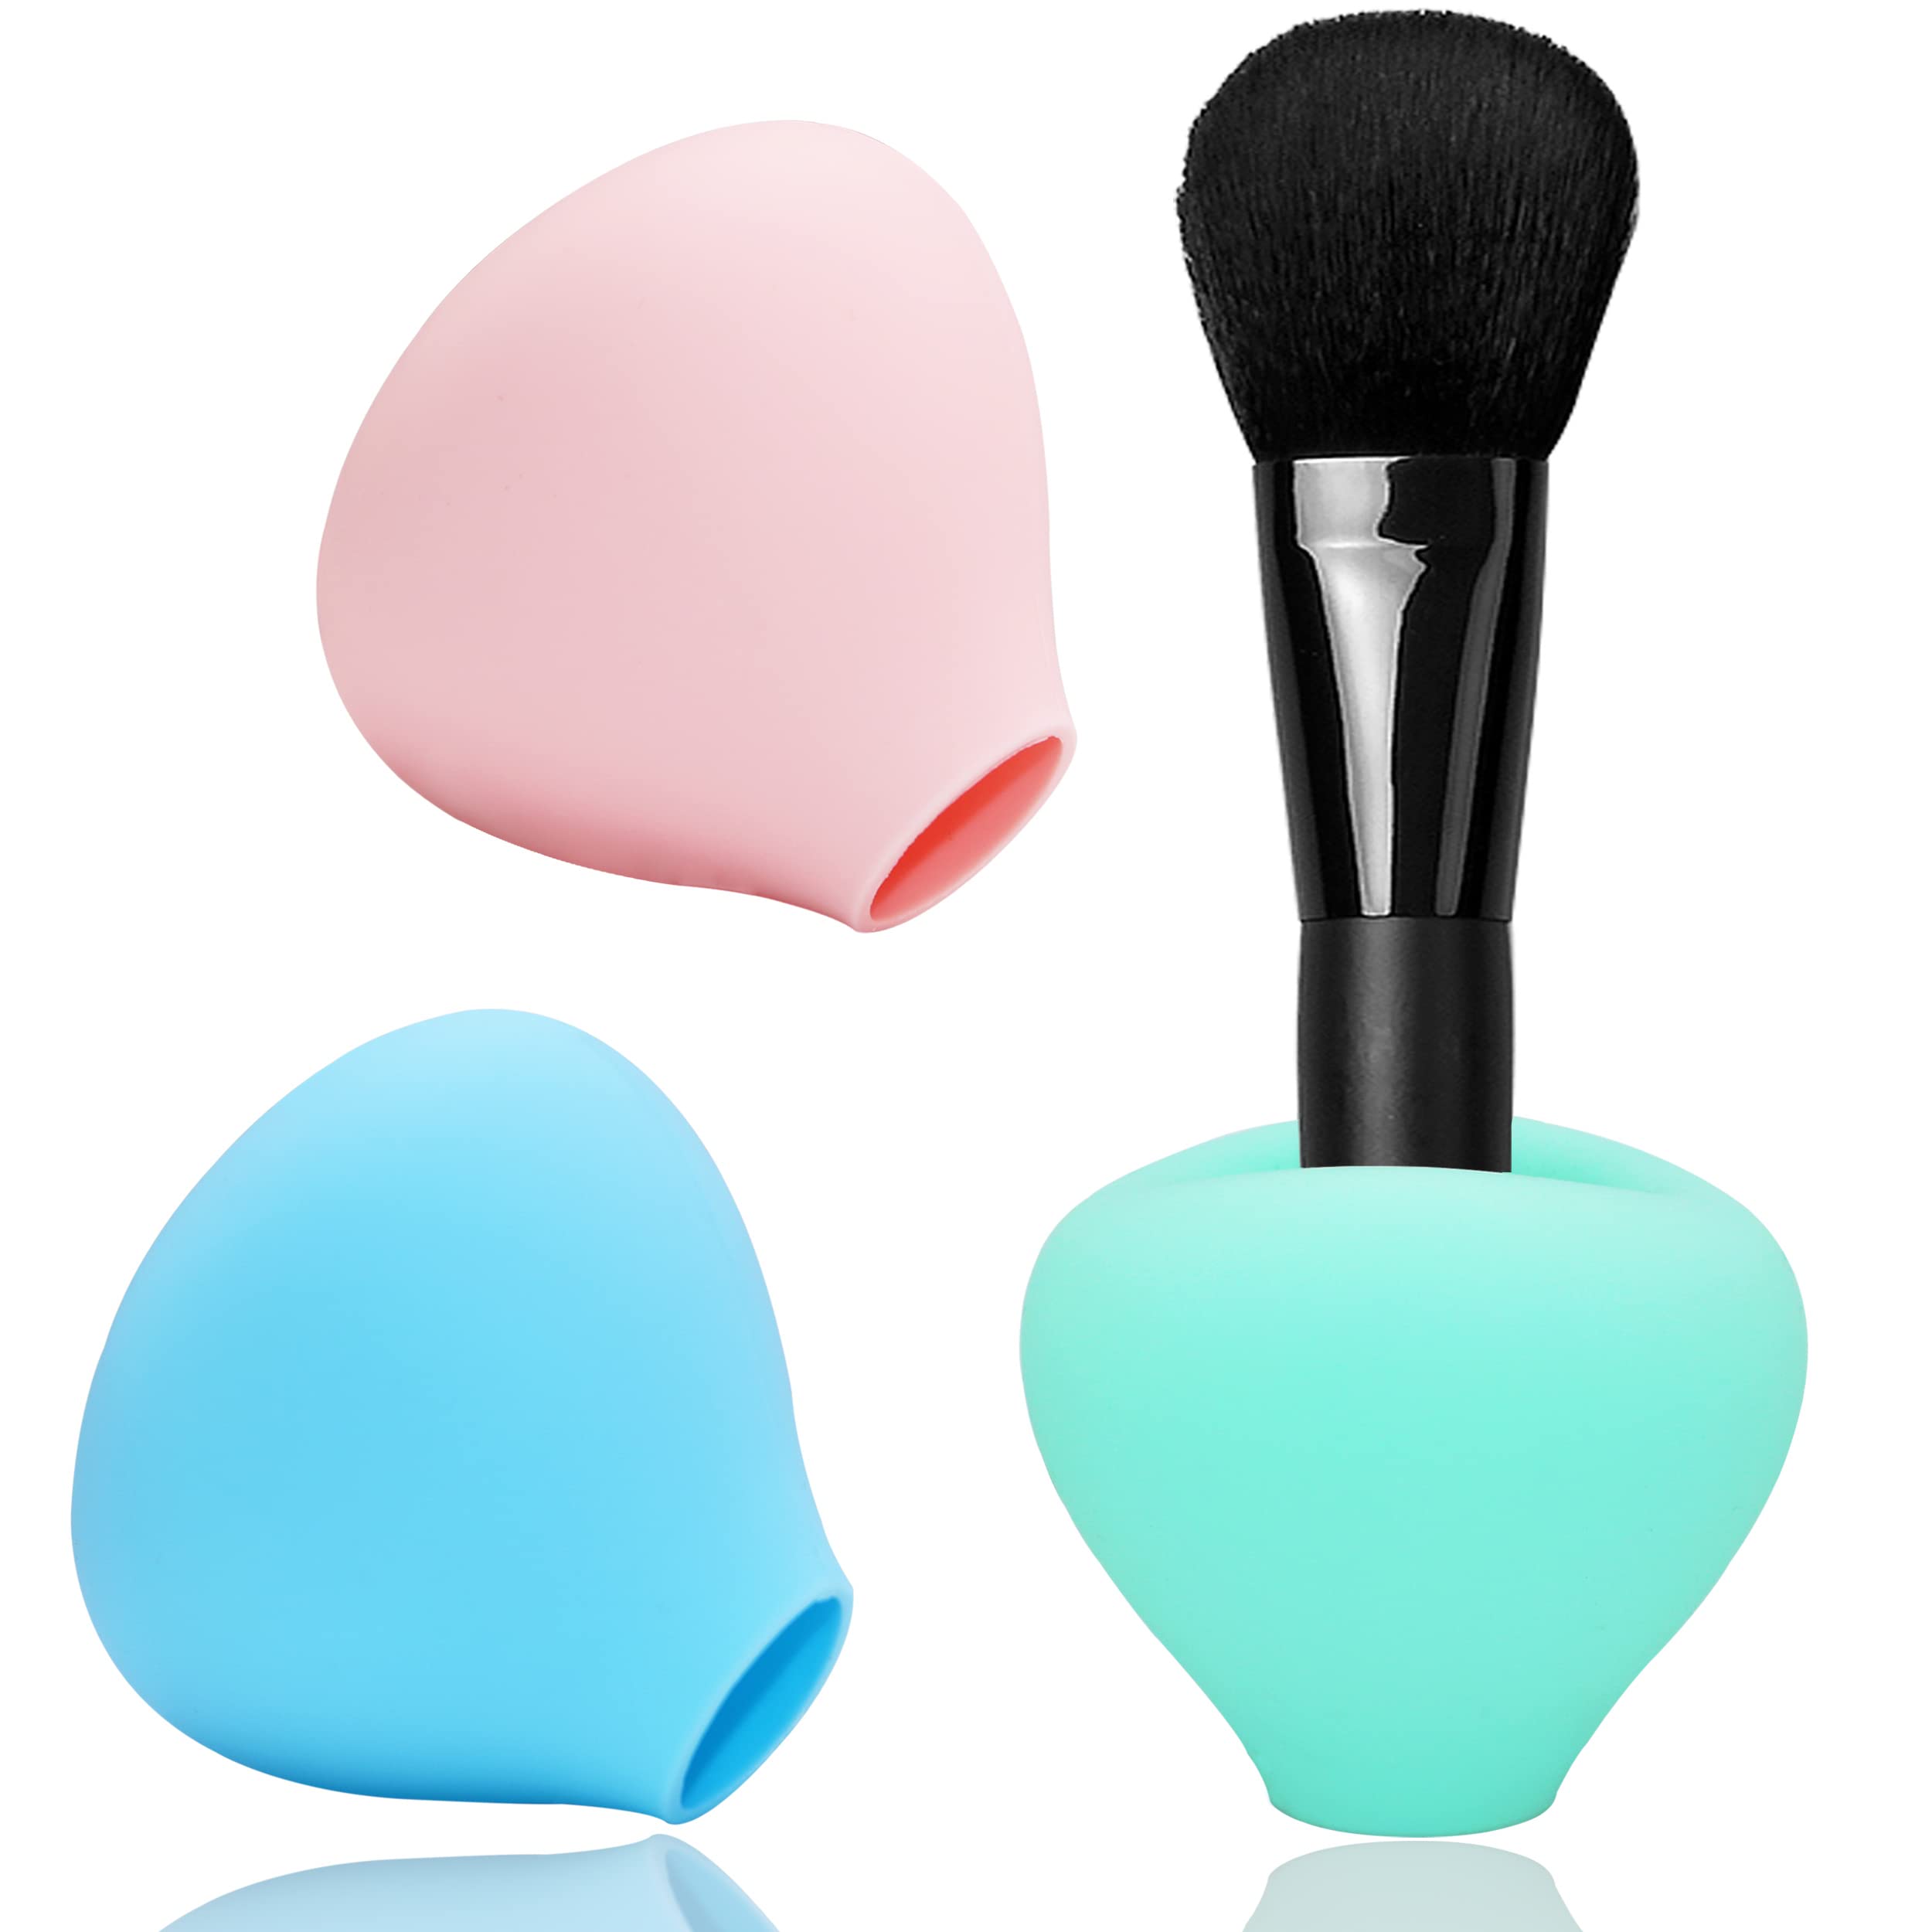 Makeup Brush Covers, Silicone Brush Organizer Case for Makeup